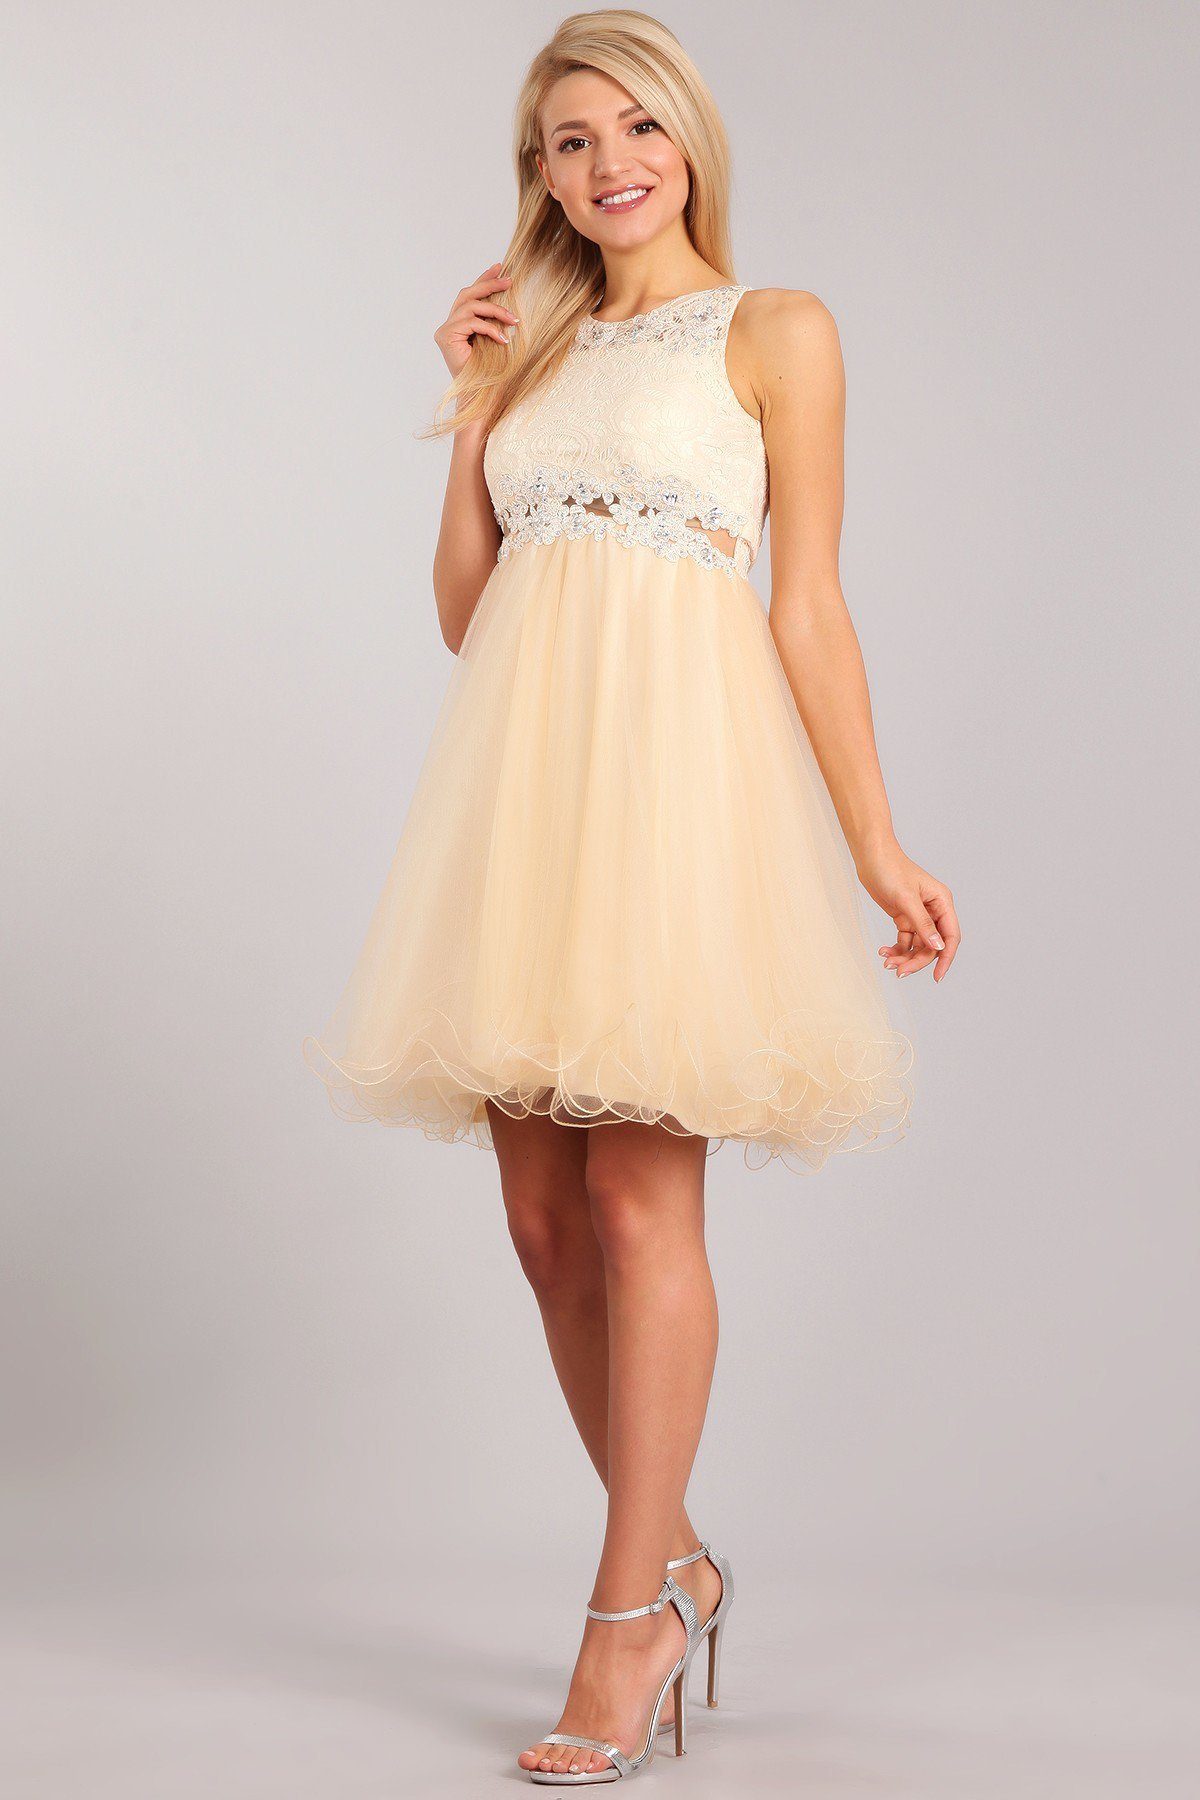 Girls Short Ruffled Dress with Lace Bodice by Cinderella Couture 5010 ...